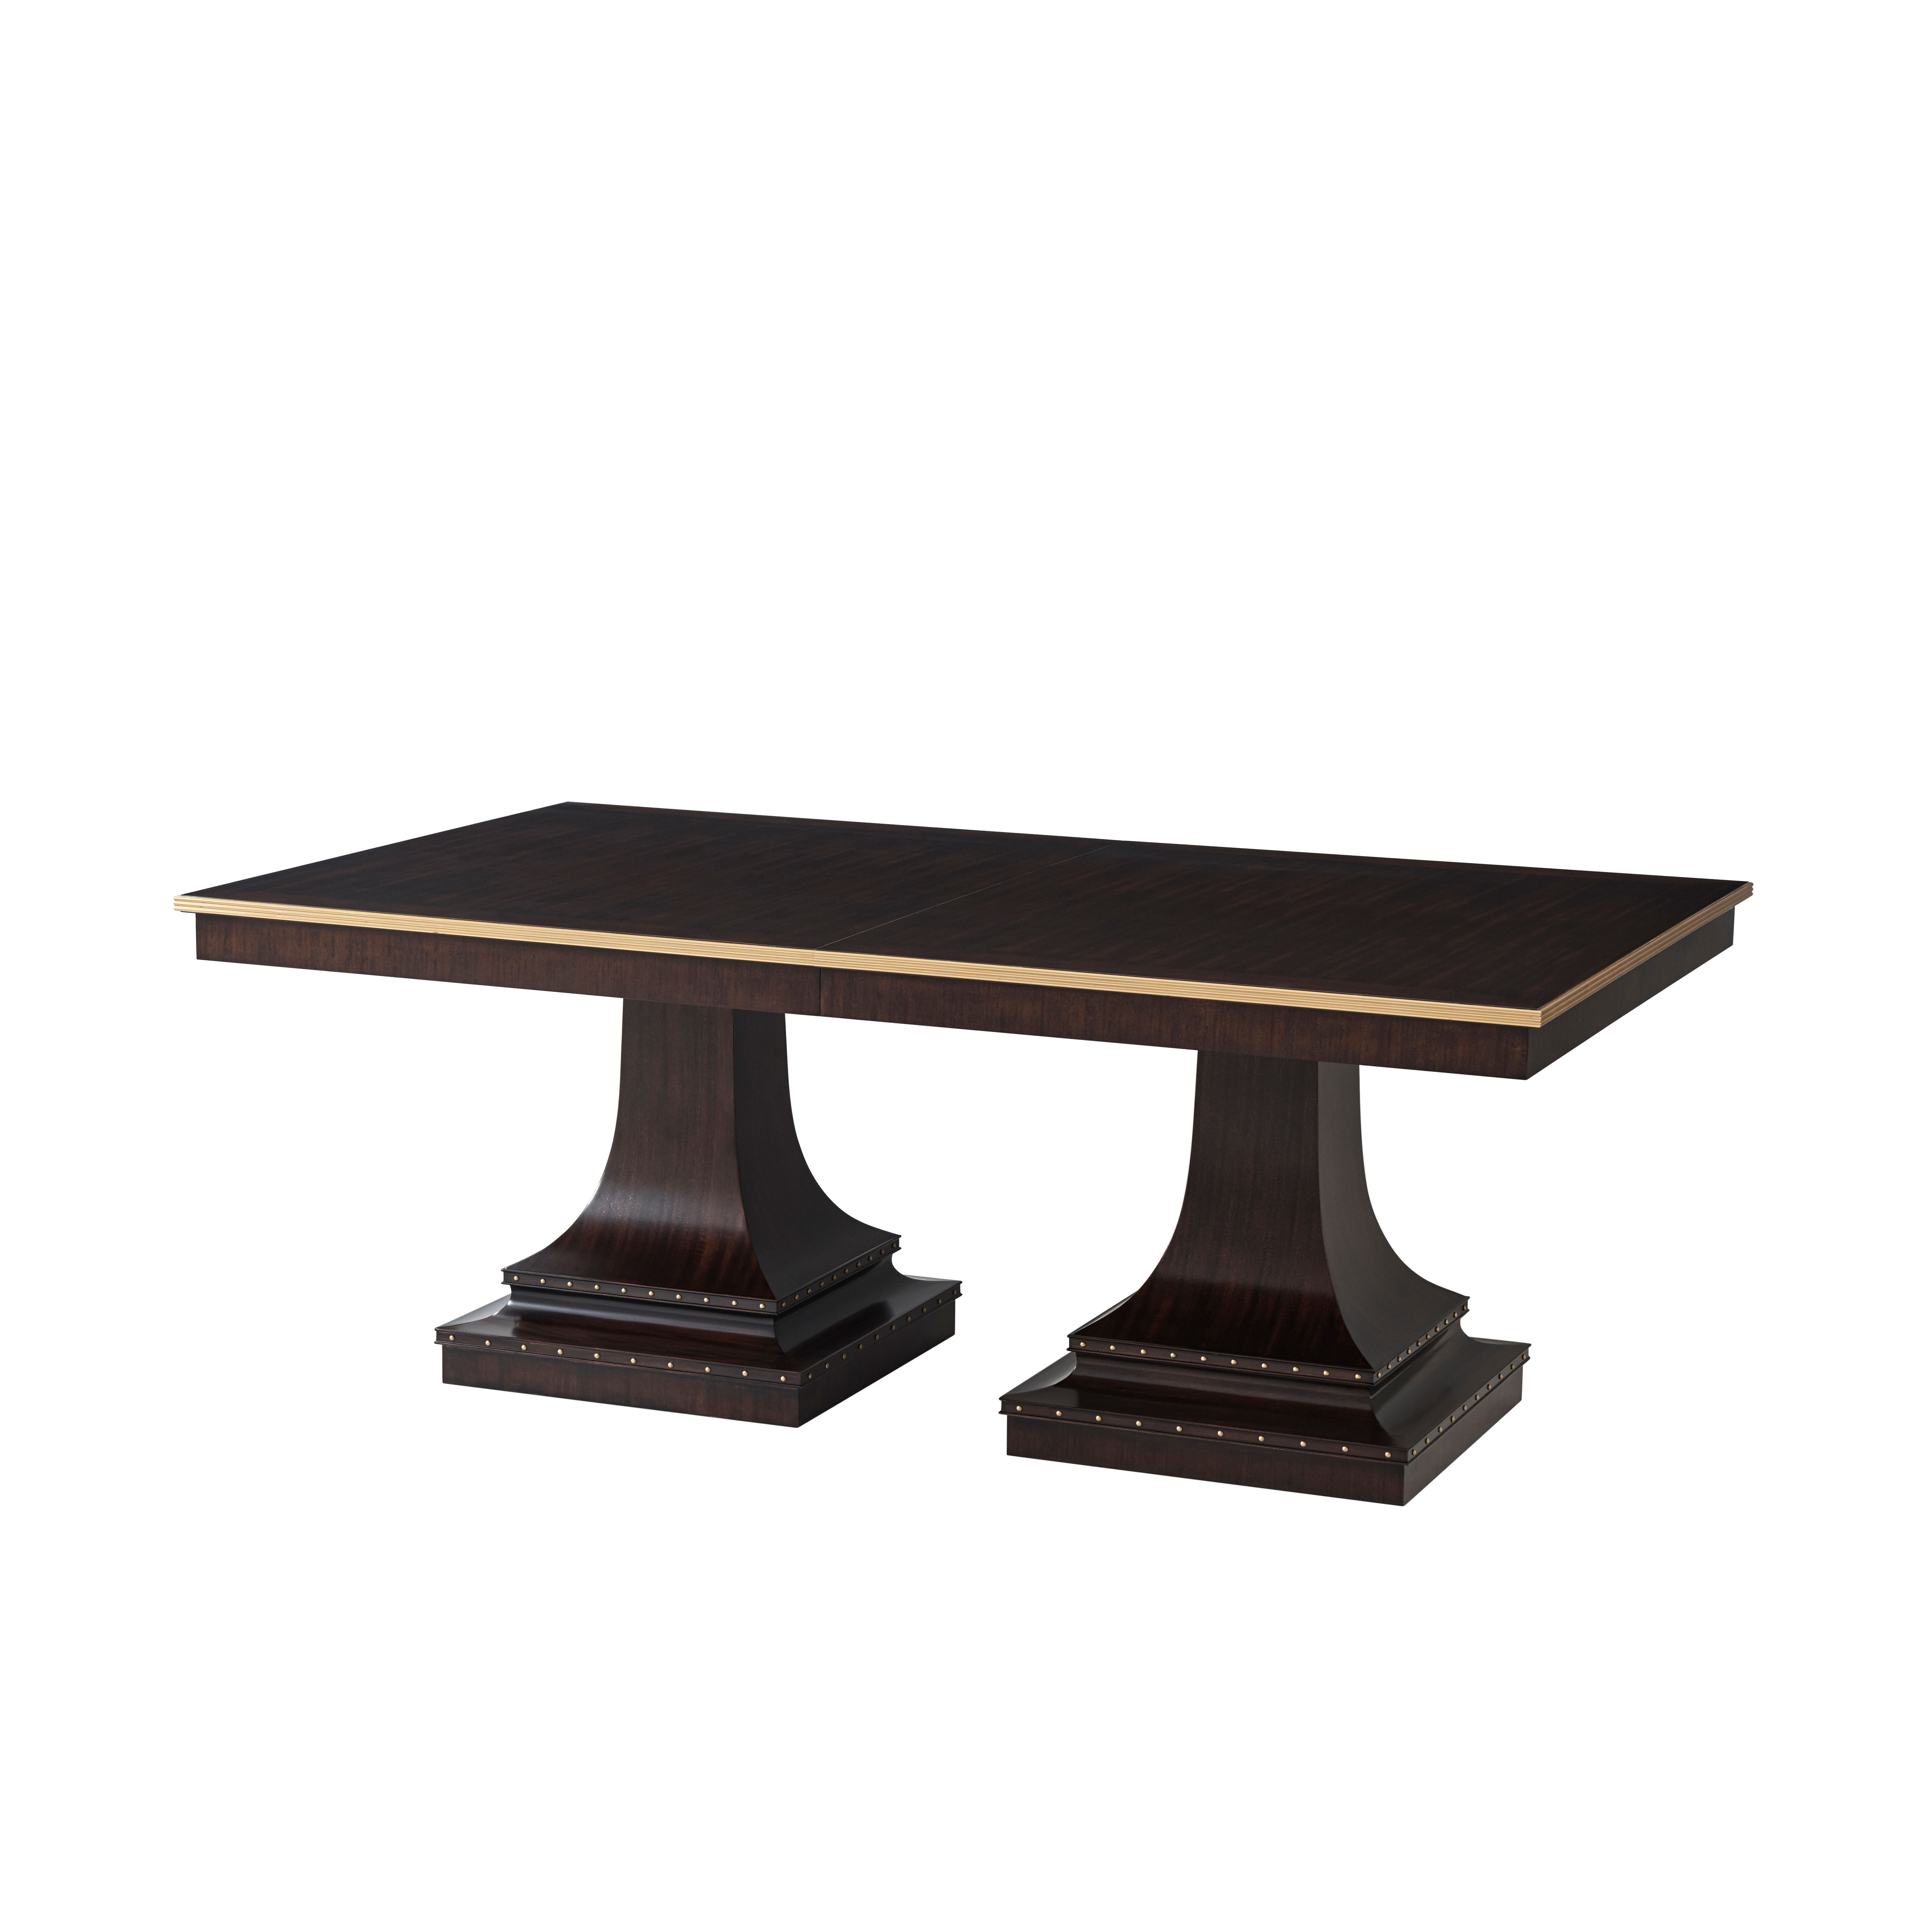 SIENA EXTENDING DINING TABLE